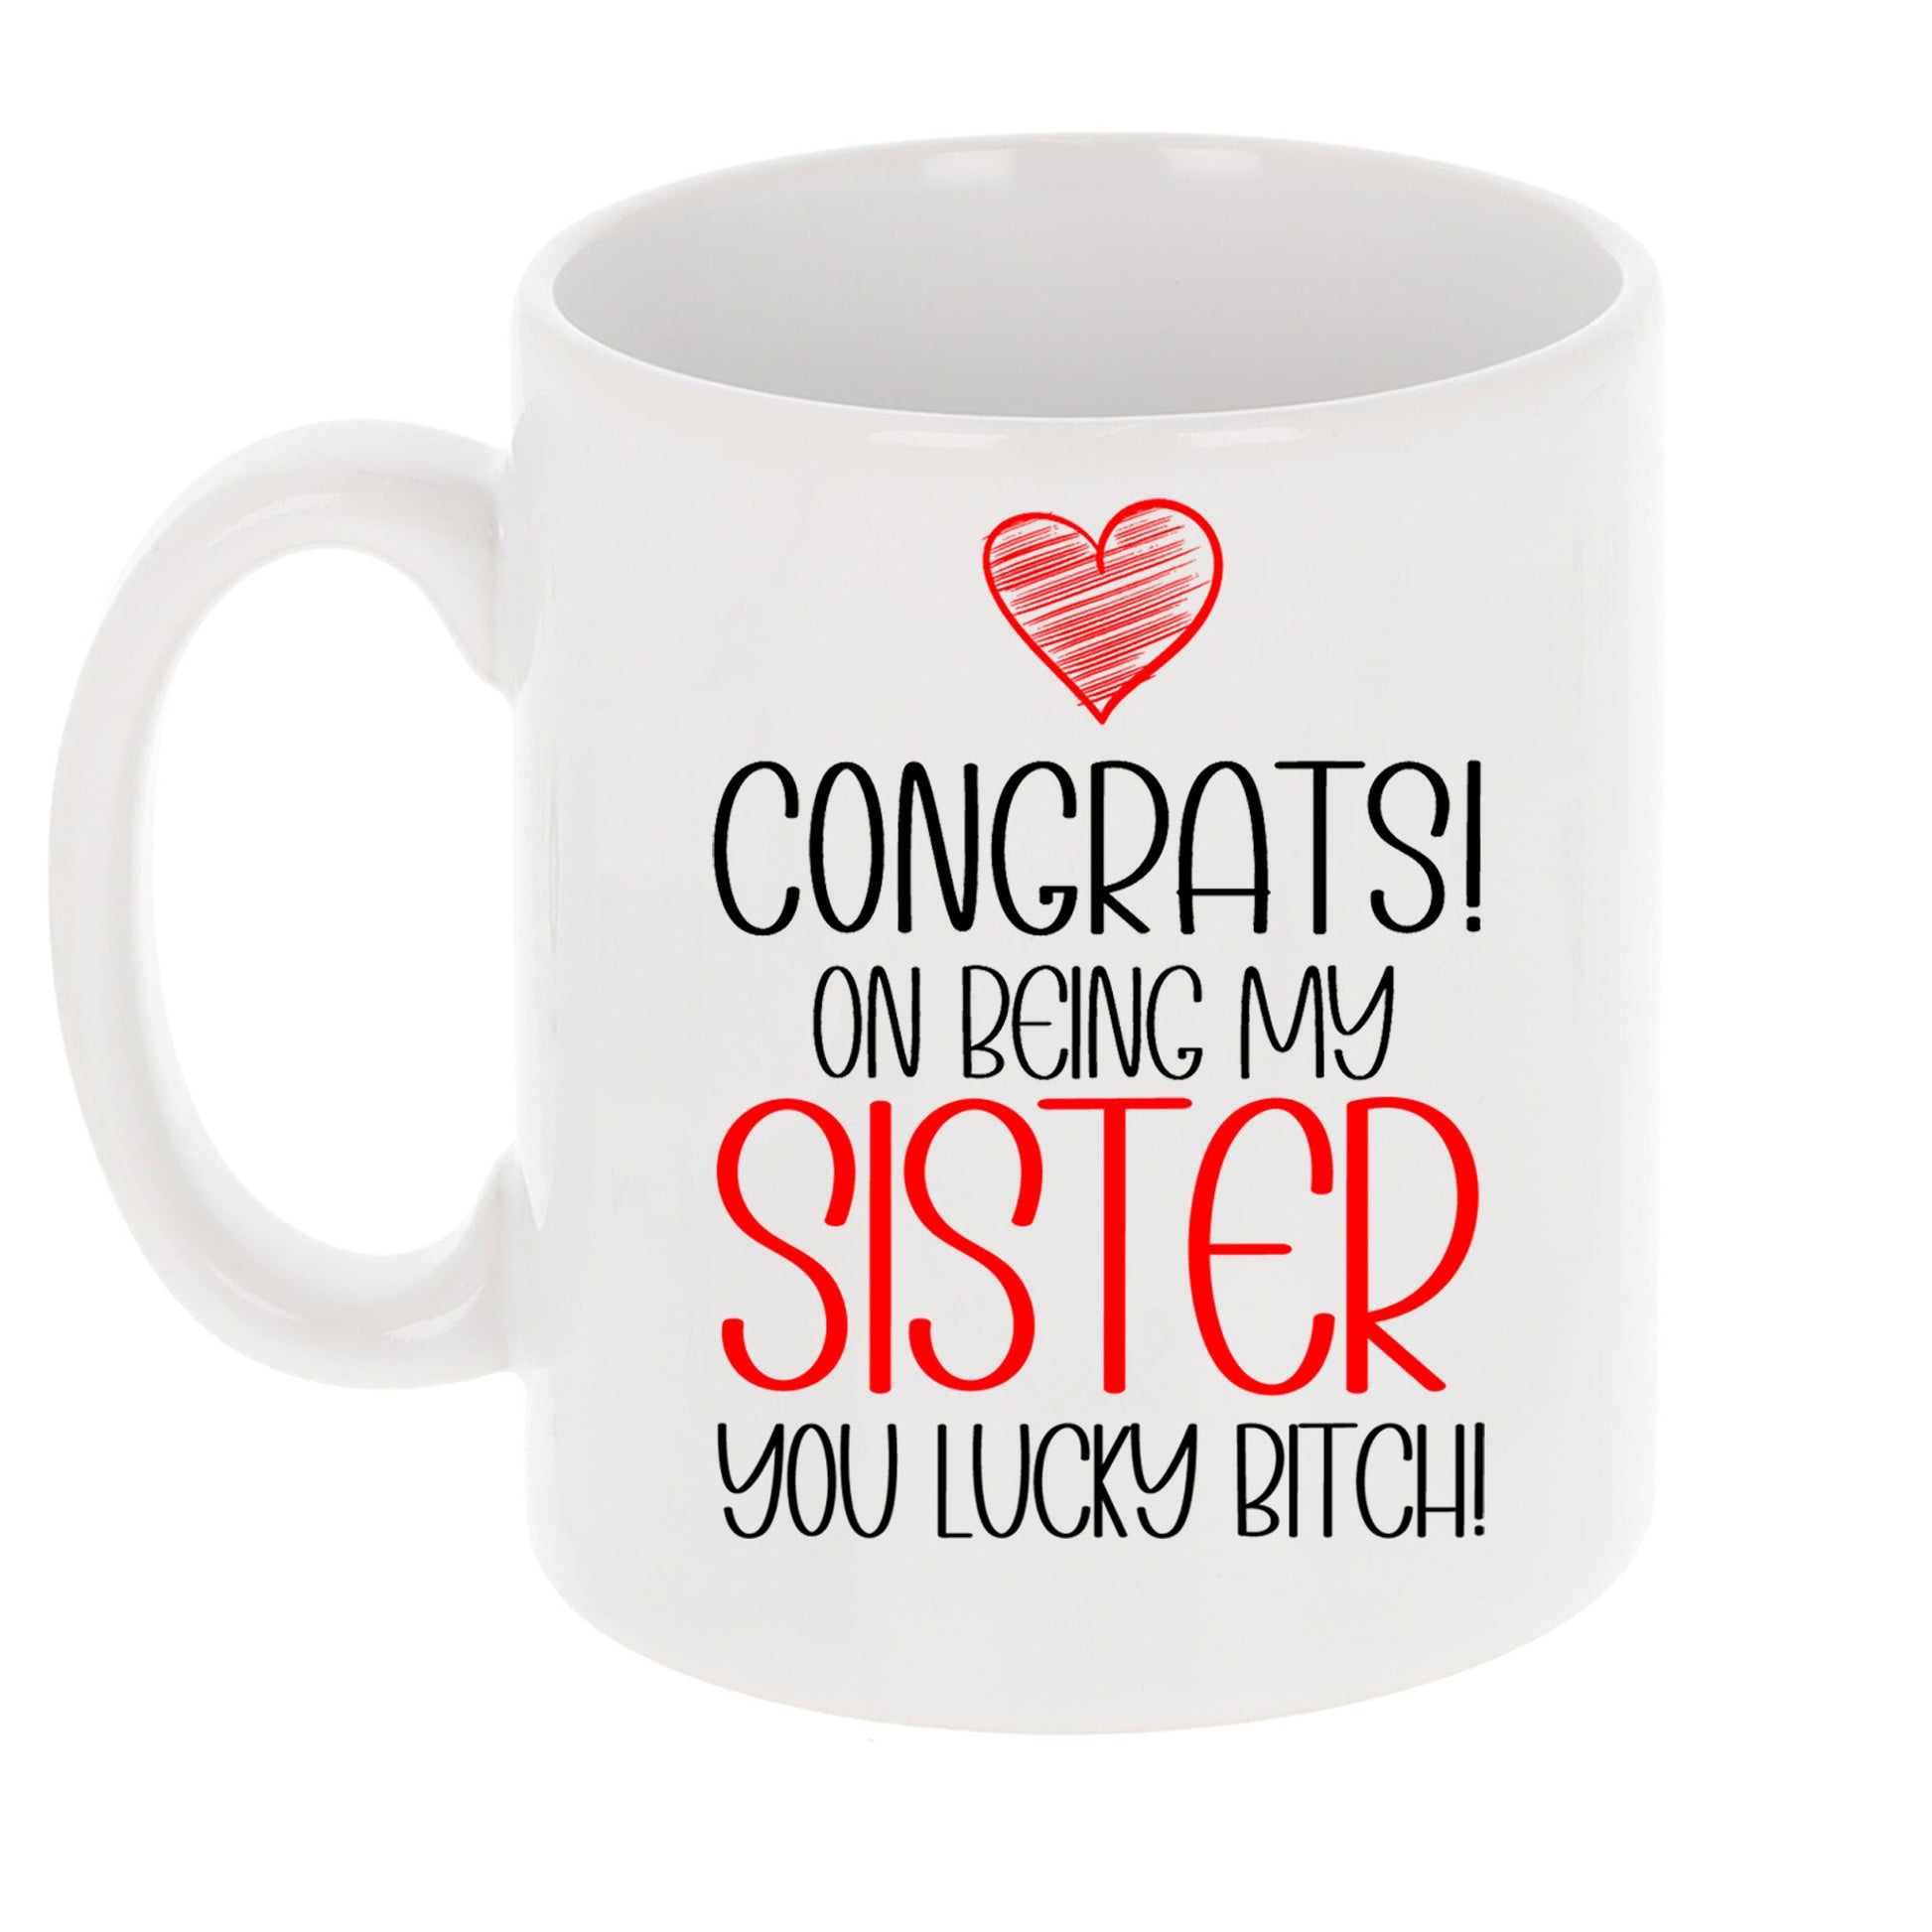 Congrats On Being My Sister Mug and/or Coaster Gift  - Always Looking Good - Lucky Bitch Mug On Its Own  